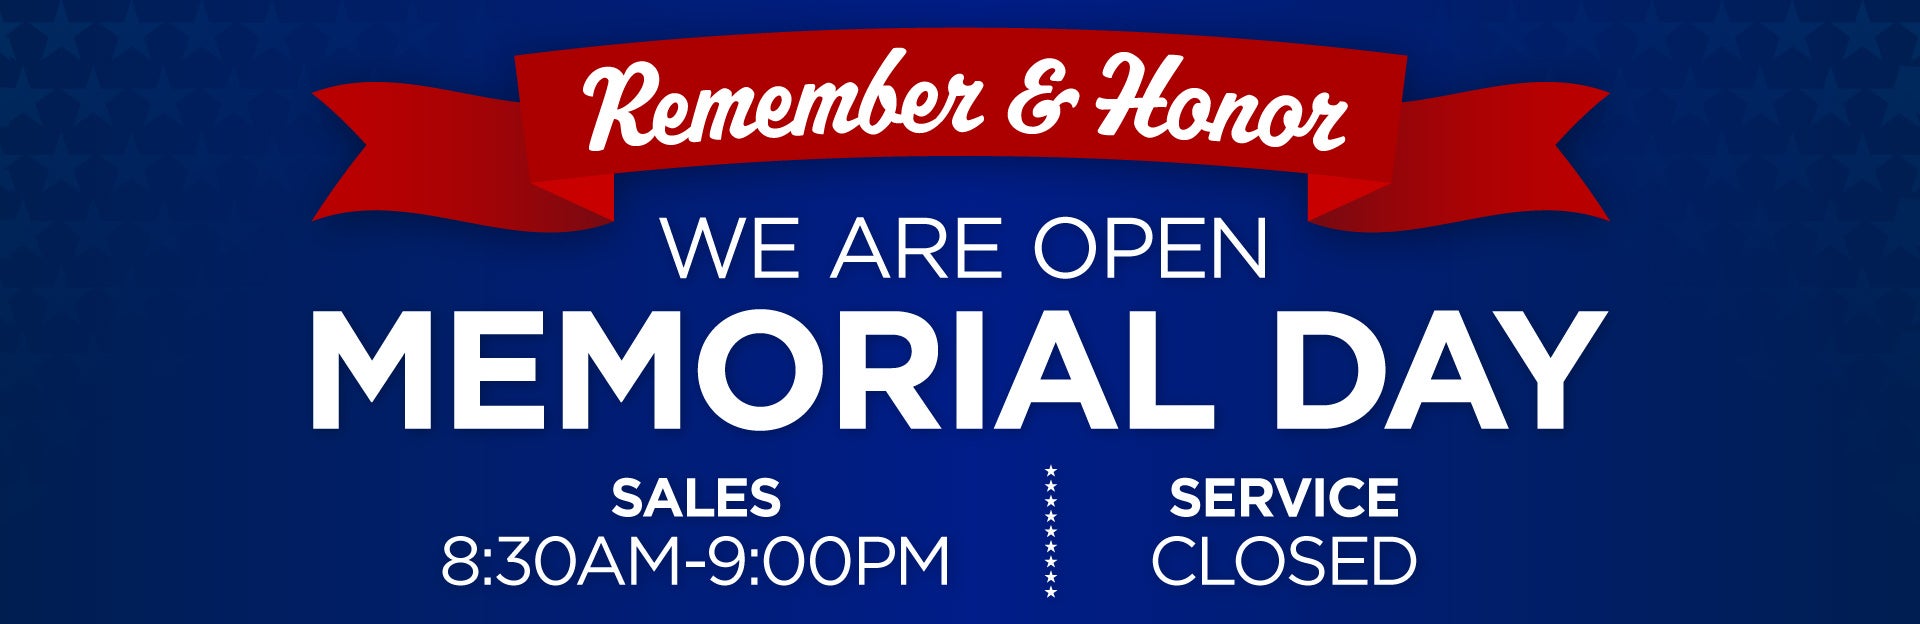 We are open Memorial Day